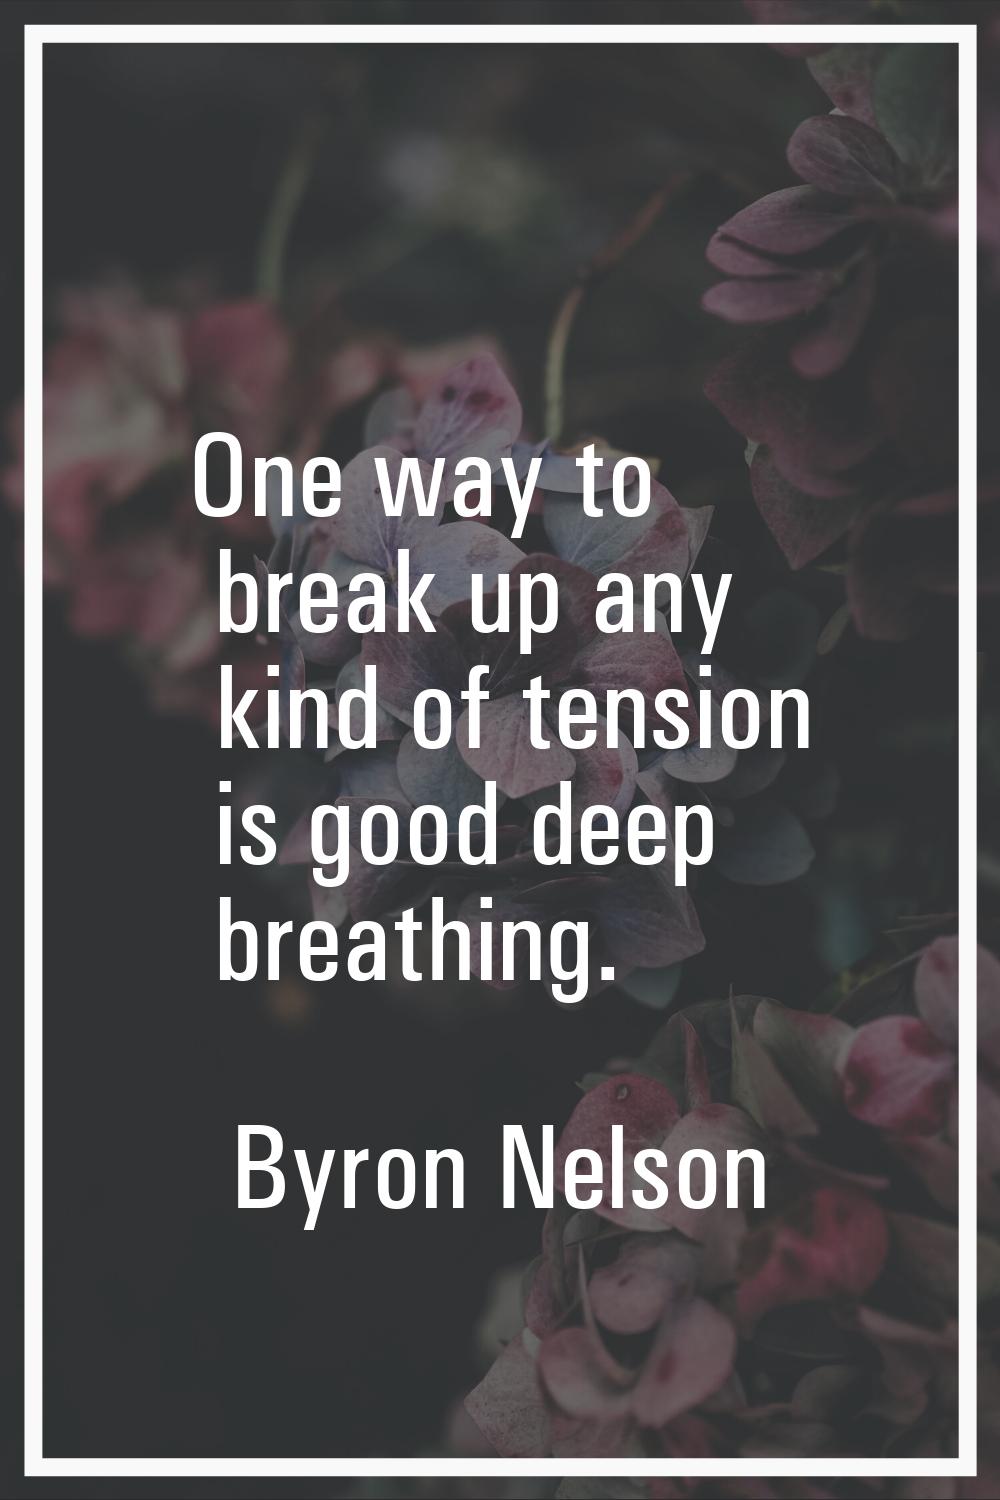 One way to break up any kind of tension is good deep breathing.